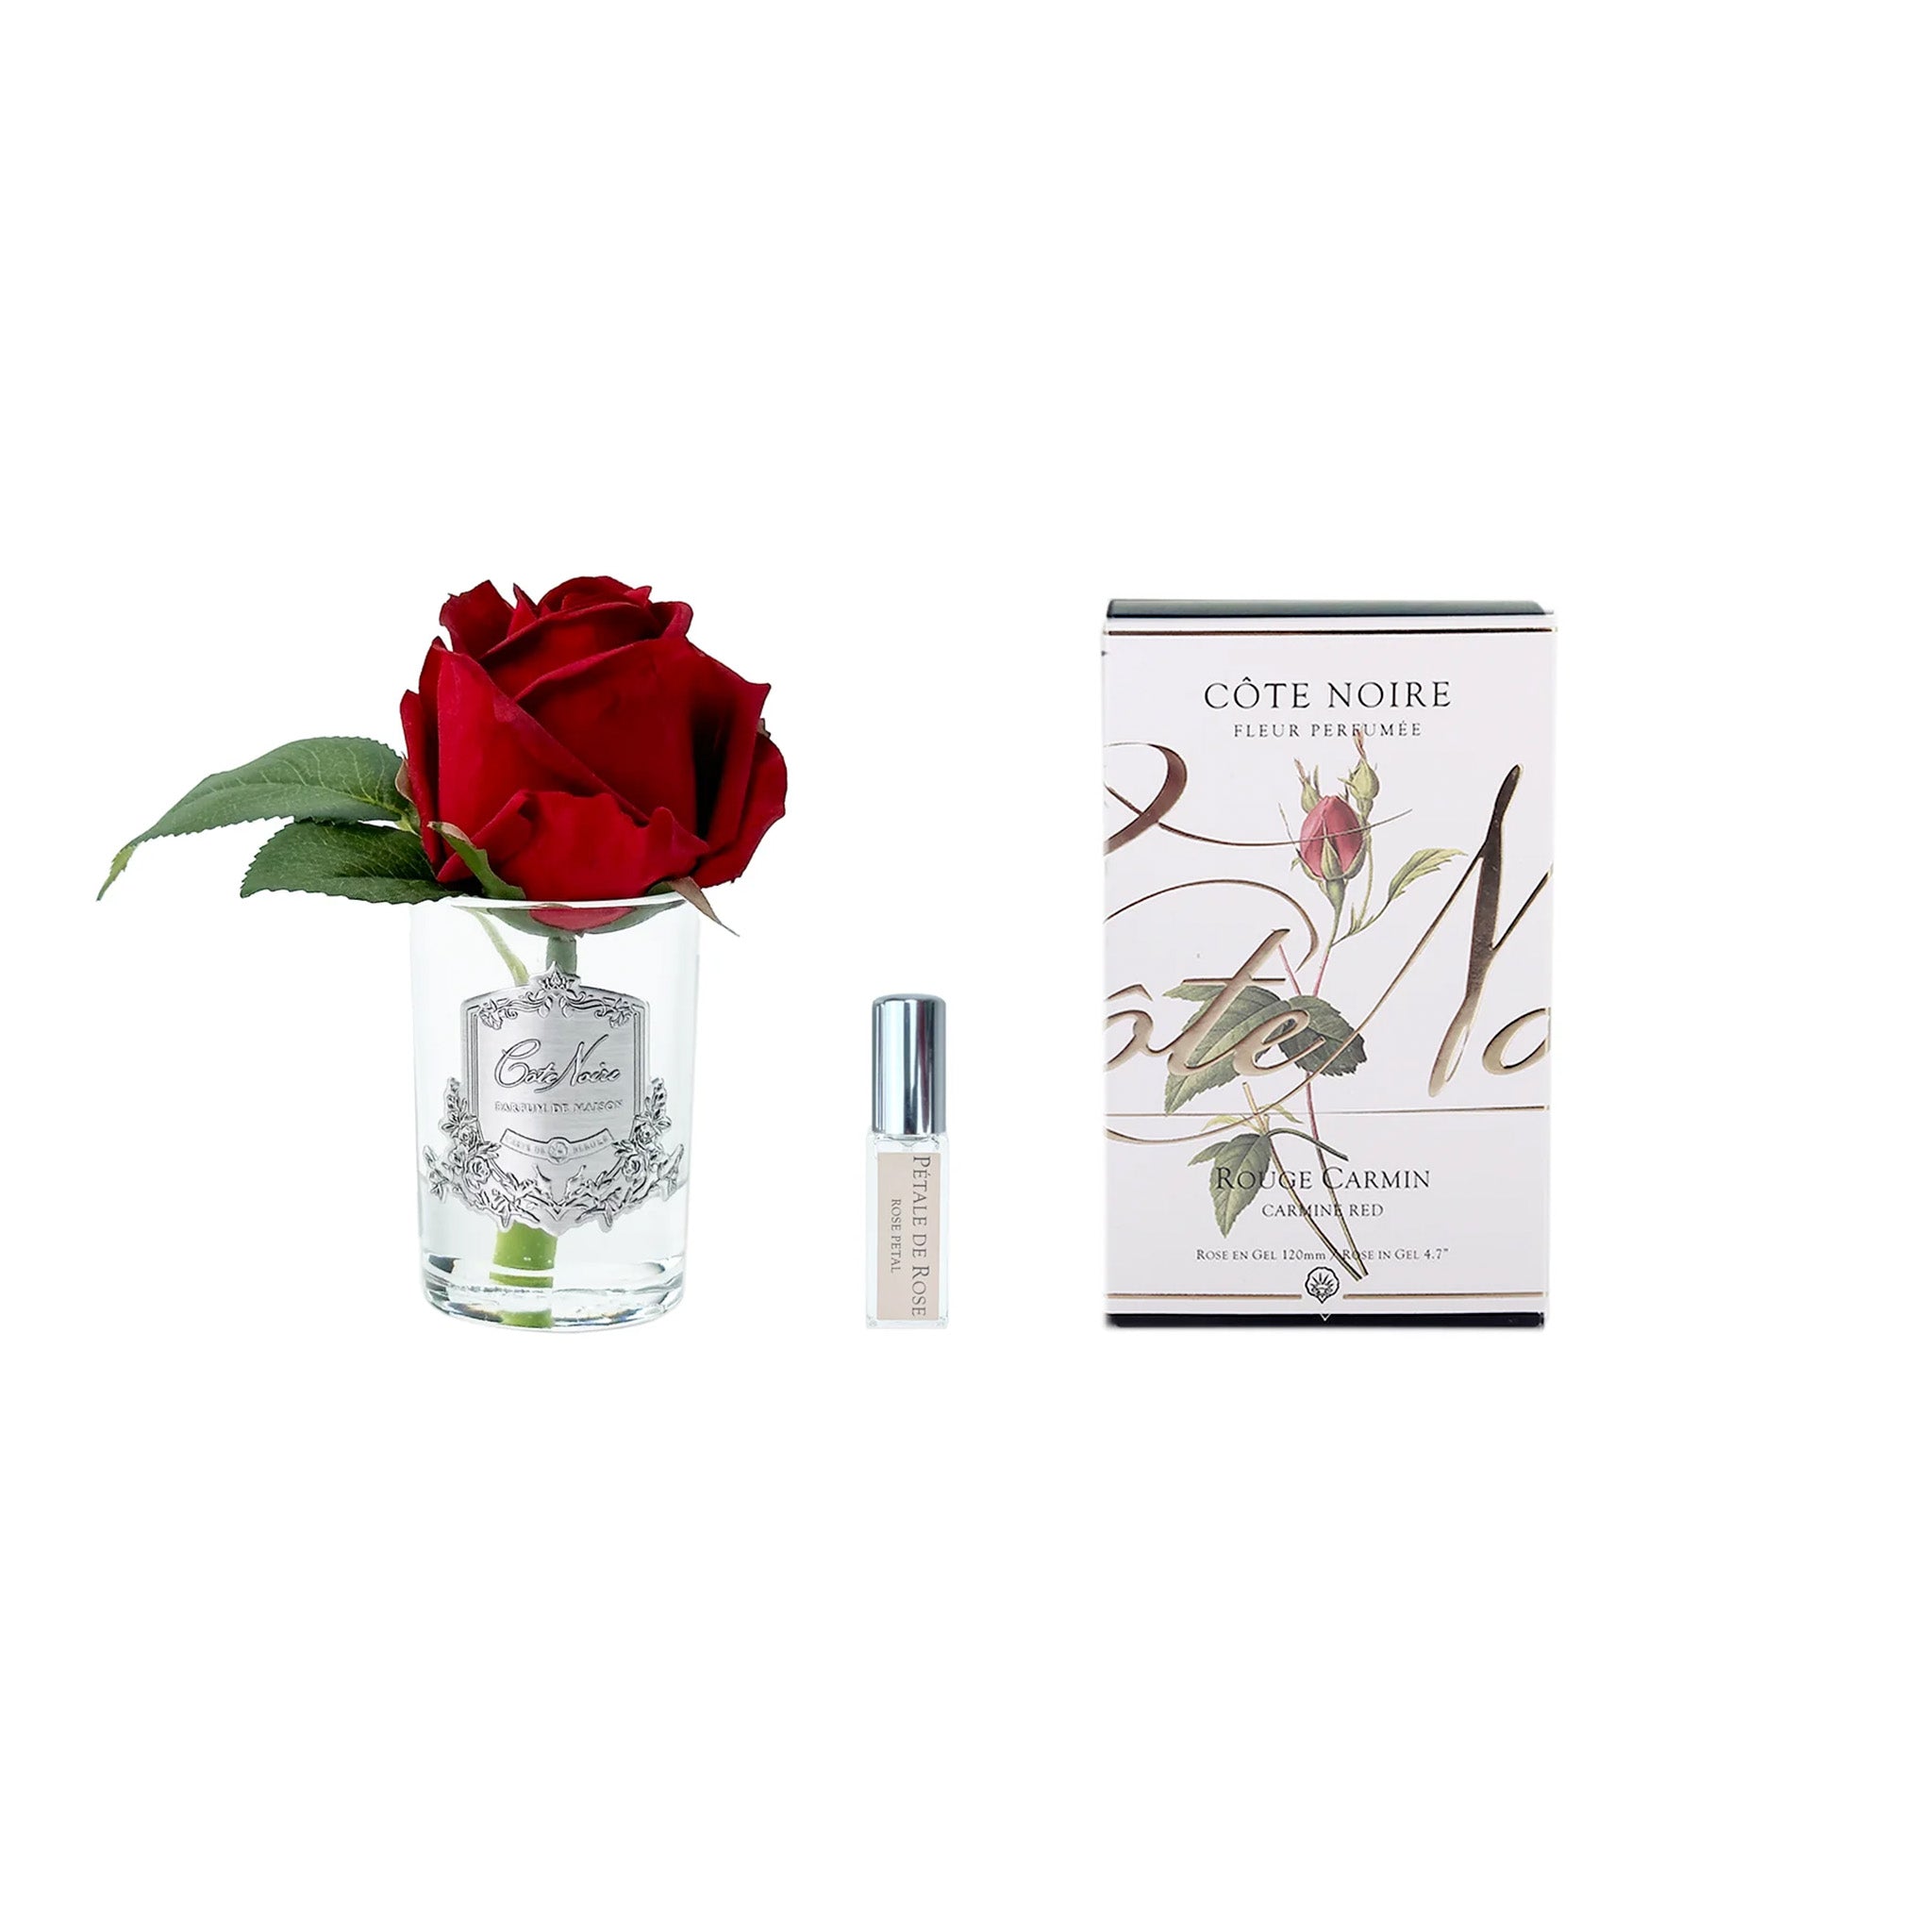 a red rose in a vase by cote noire next to a box of fragrance